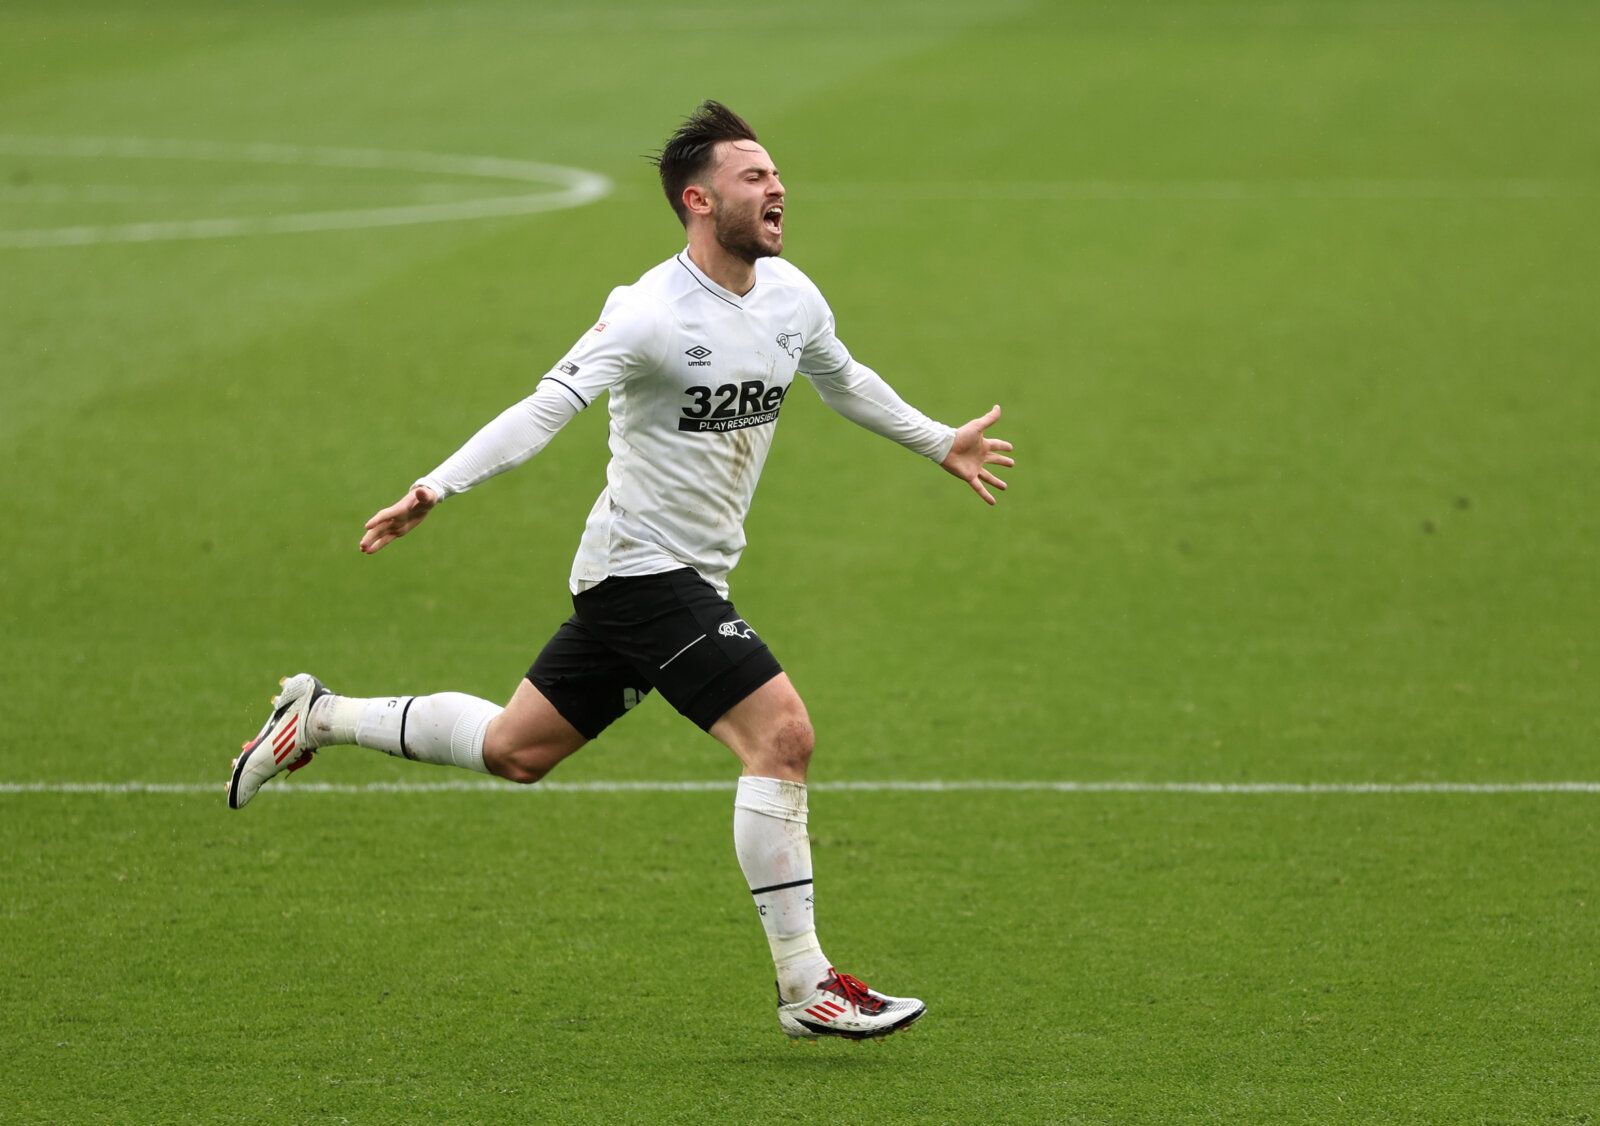 Soccer Football - Championship - Derby County v Sheffield Wednesday - Pride Park, Derby, Britain - May 8, 2021 Derby County's Patrick Roberts celebrates after scoring their second goal Action Images/Molly Darlington EDITORIAL USE ONLY. No use with unauthorized audio, video, data, fixture lists, club/league logos or 'live' services. Online in-match use limited to 75 images, no video emulation. No use in betting, games or single club /league/player publications.  Please contact your account repres